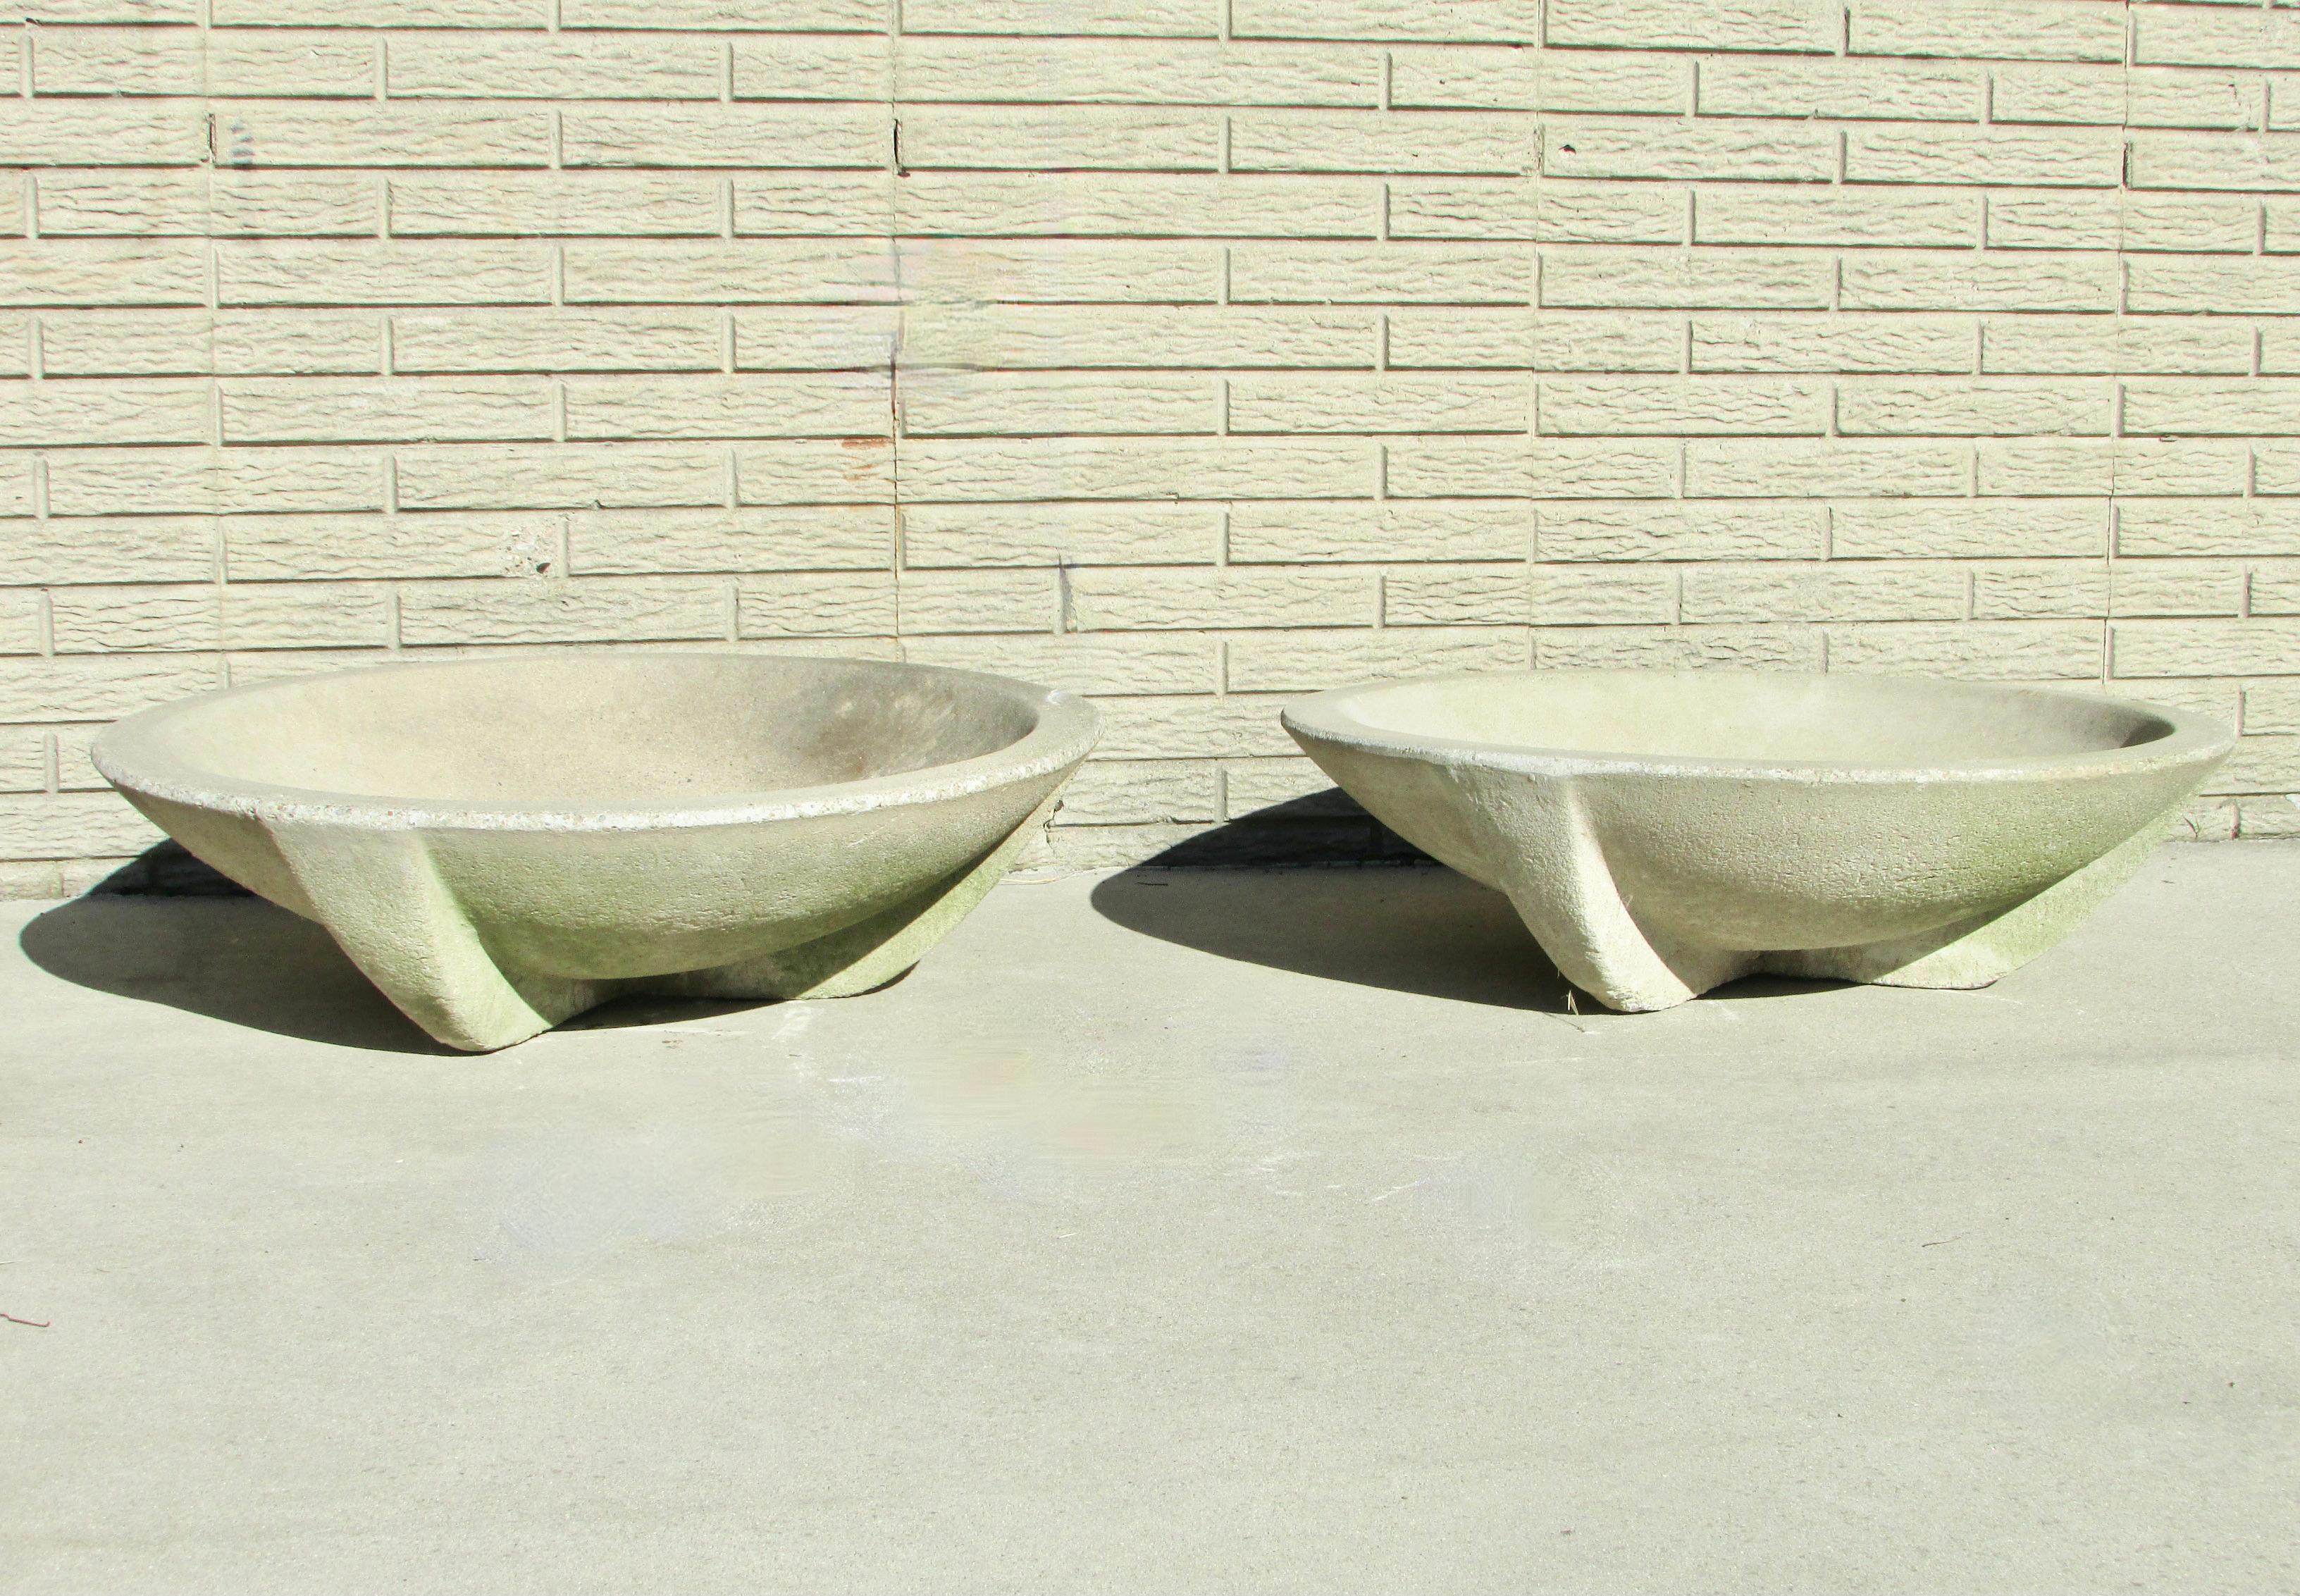 Frank Lloyd Wright Style Arts and Crafts Prairie School Cement Planter Pots For Sale 2